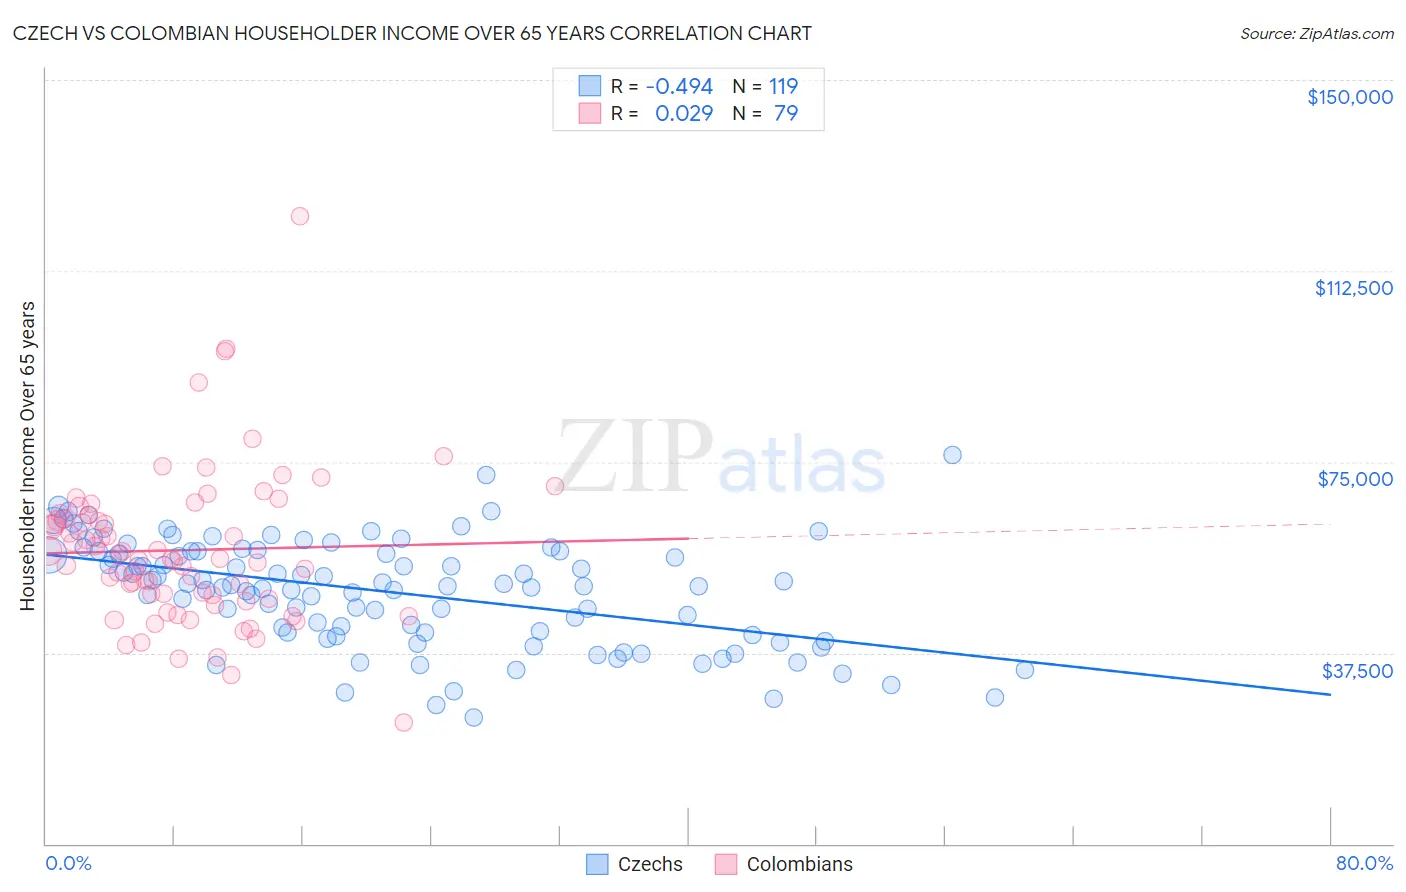 Czech vs Colombian Householder Income Over 65 years